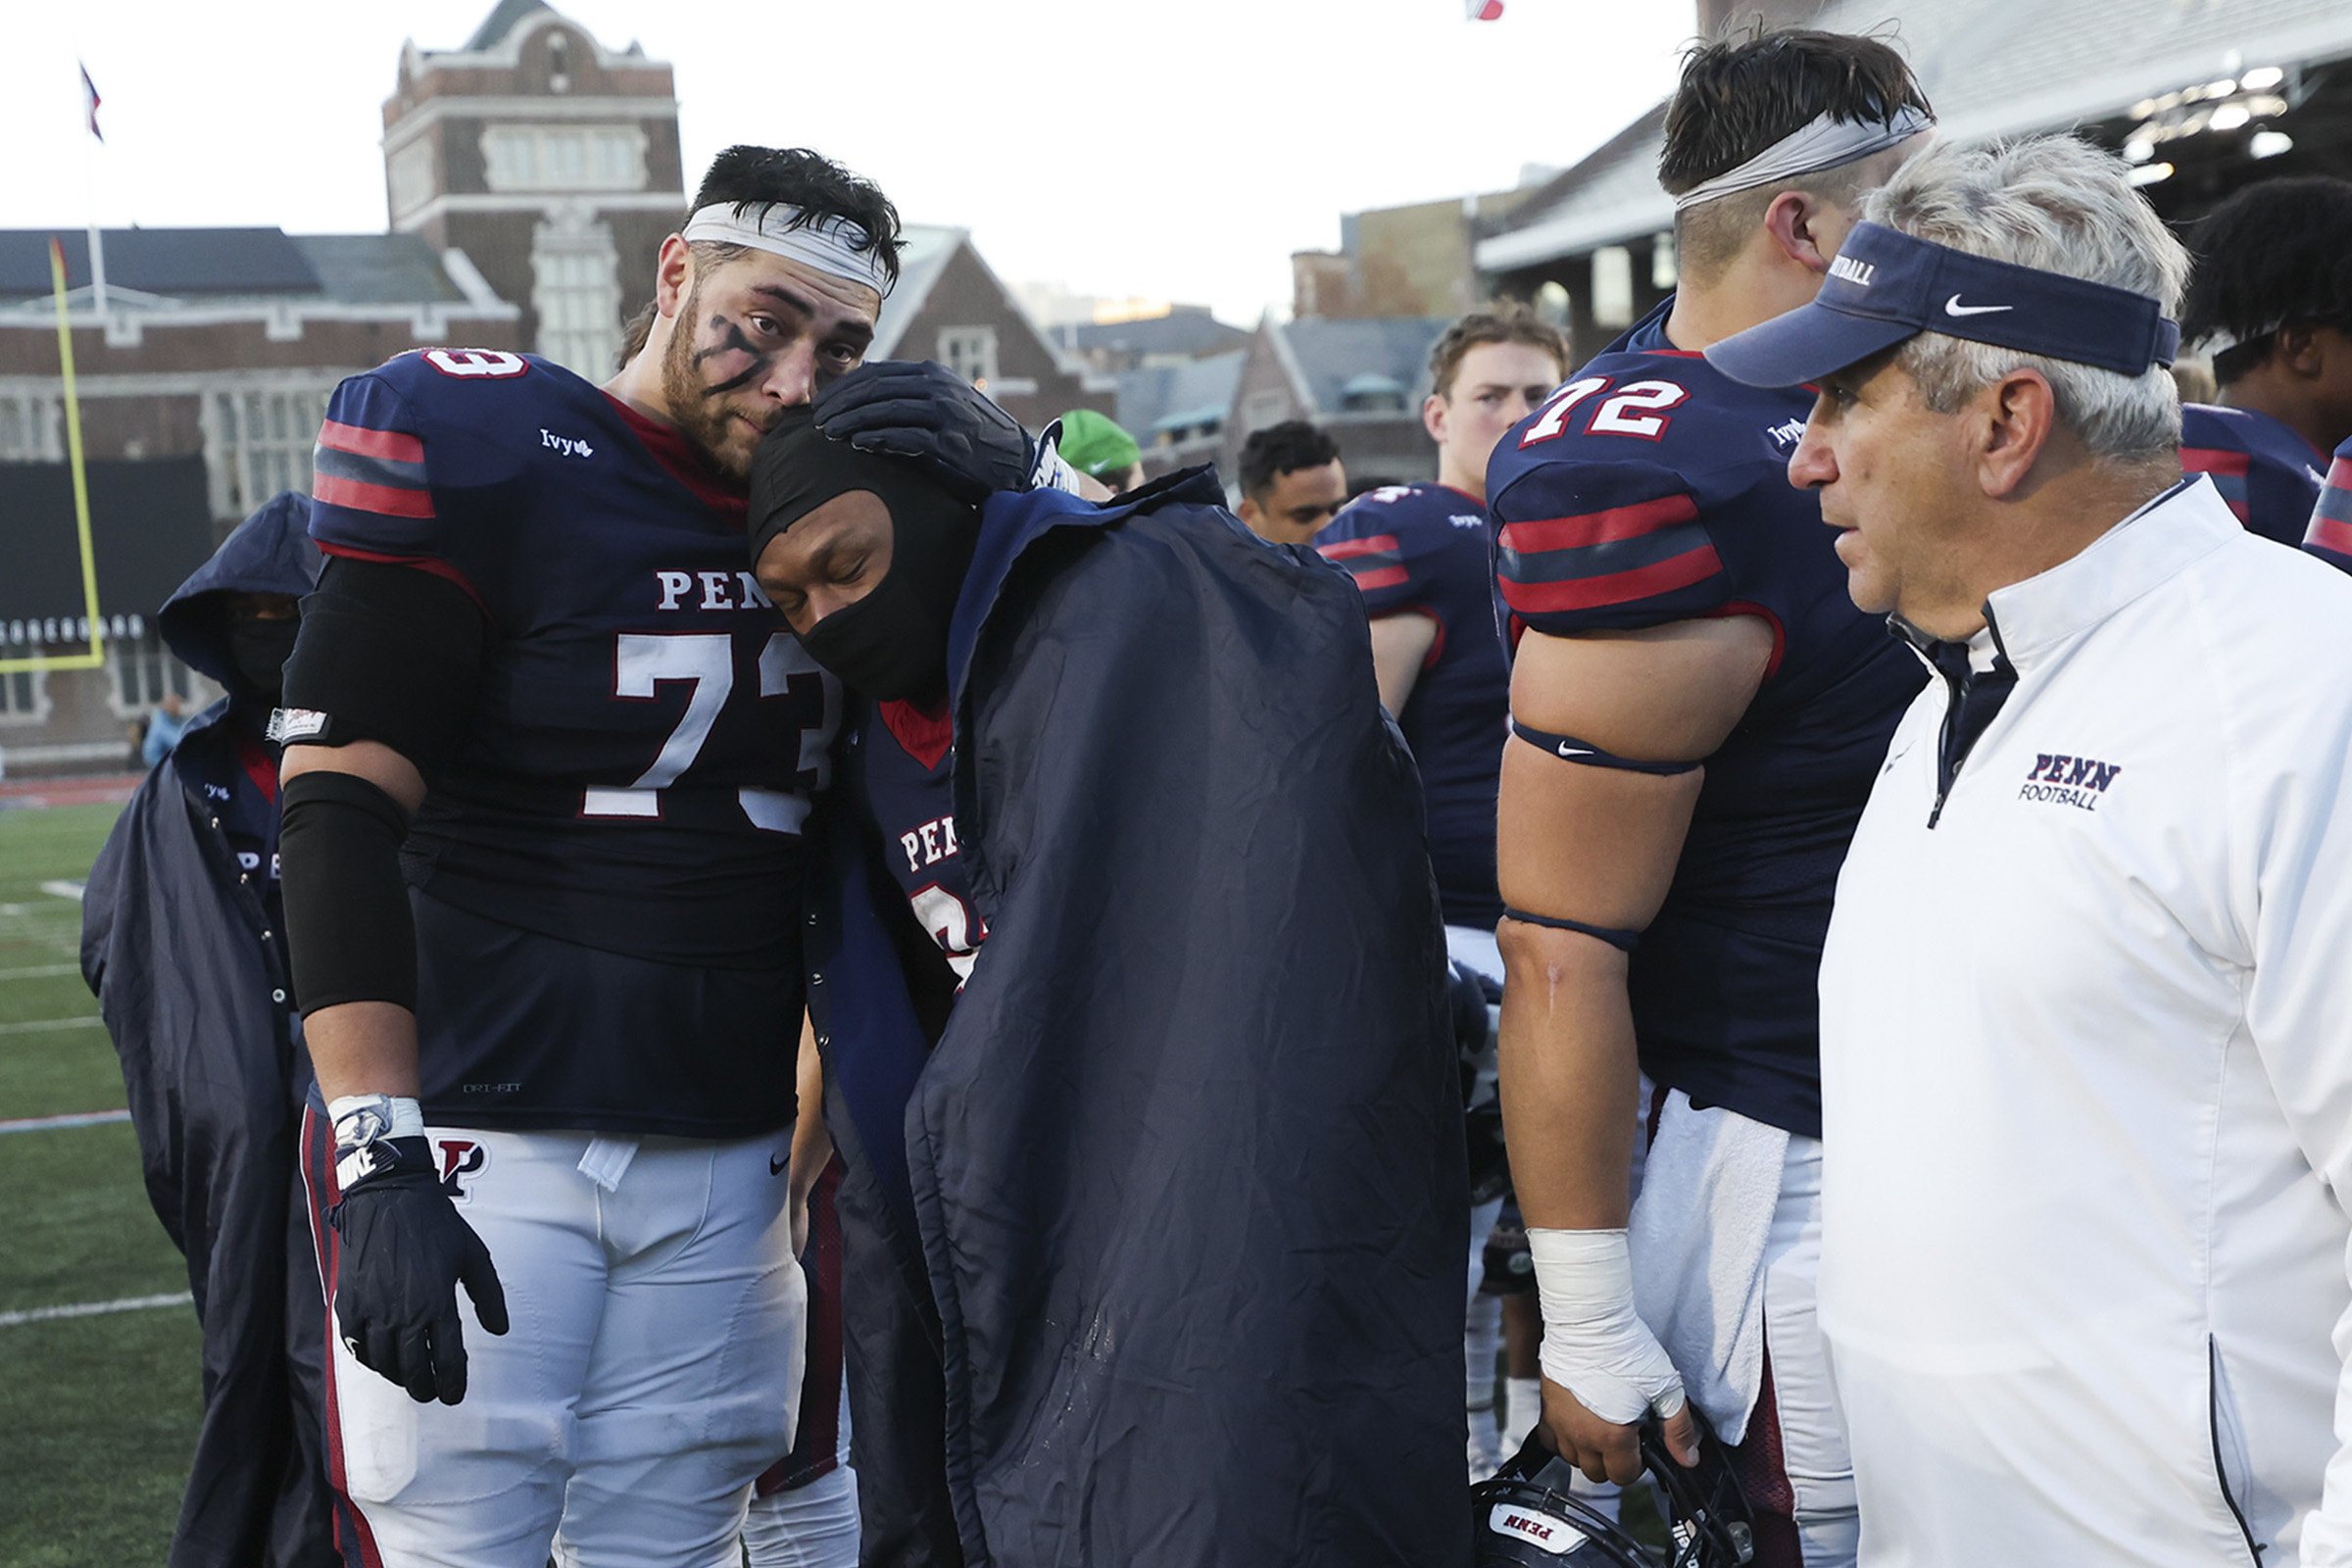  Penn players embrace after their final game of the season in a 31-24 loss to Princeton at Franklin Field in Philadelphia on Nov. 18, 2023. 